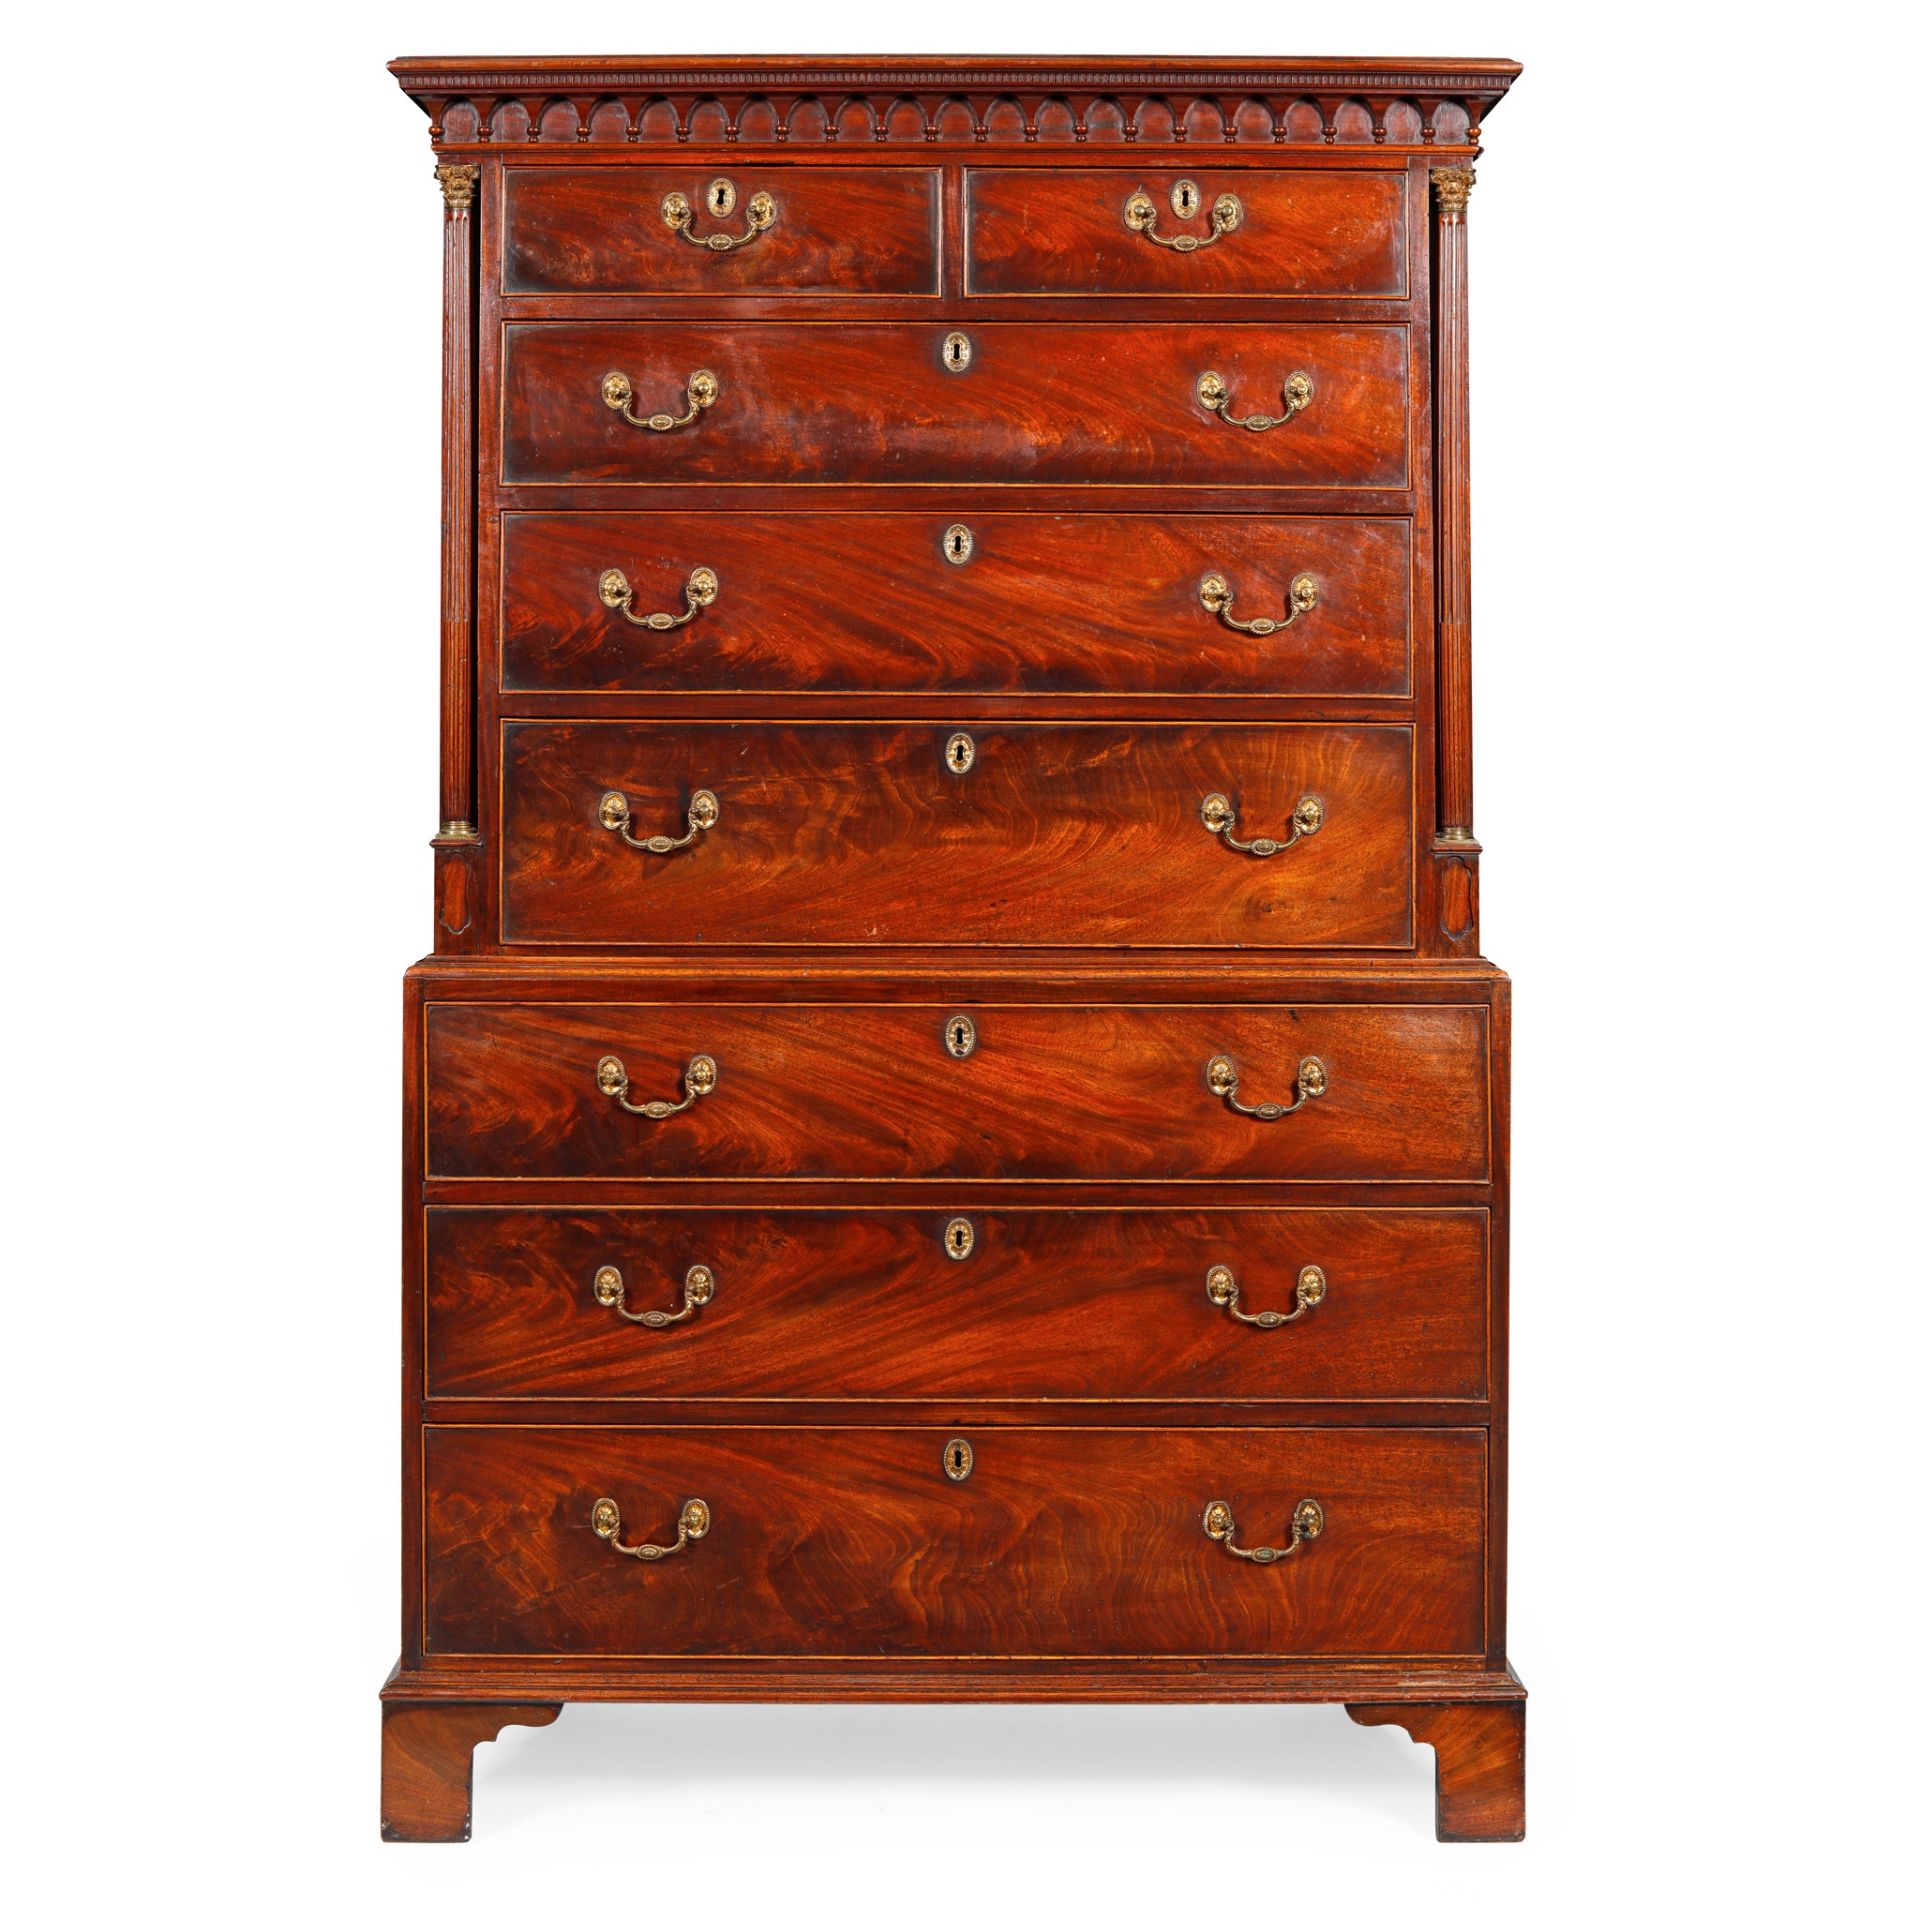 GEORGE III MAHOGANY CHEST ON CHEST MID 18TH CENTURY